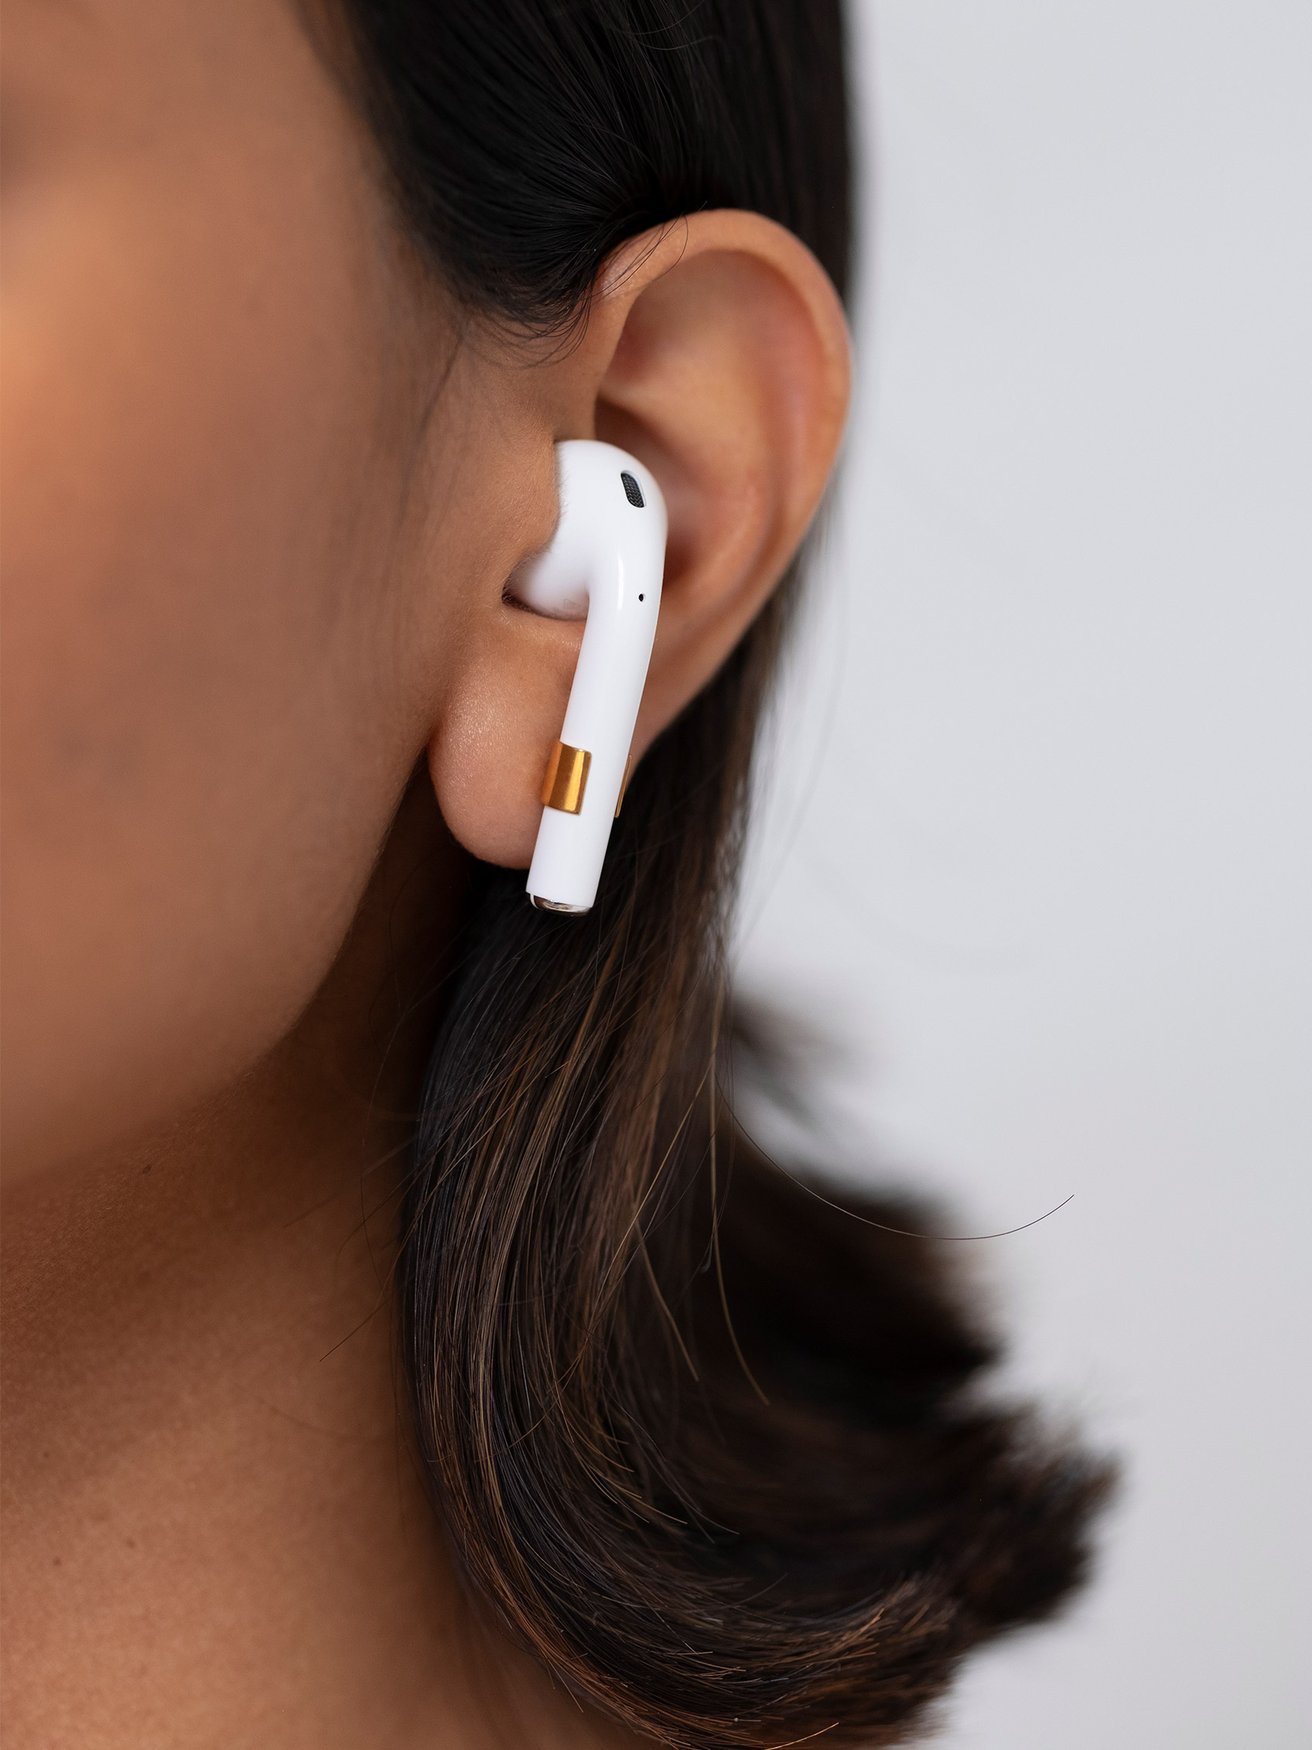 Airpods-4